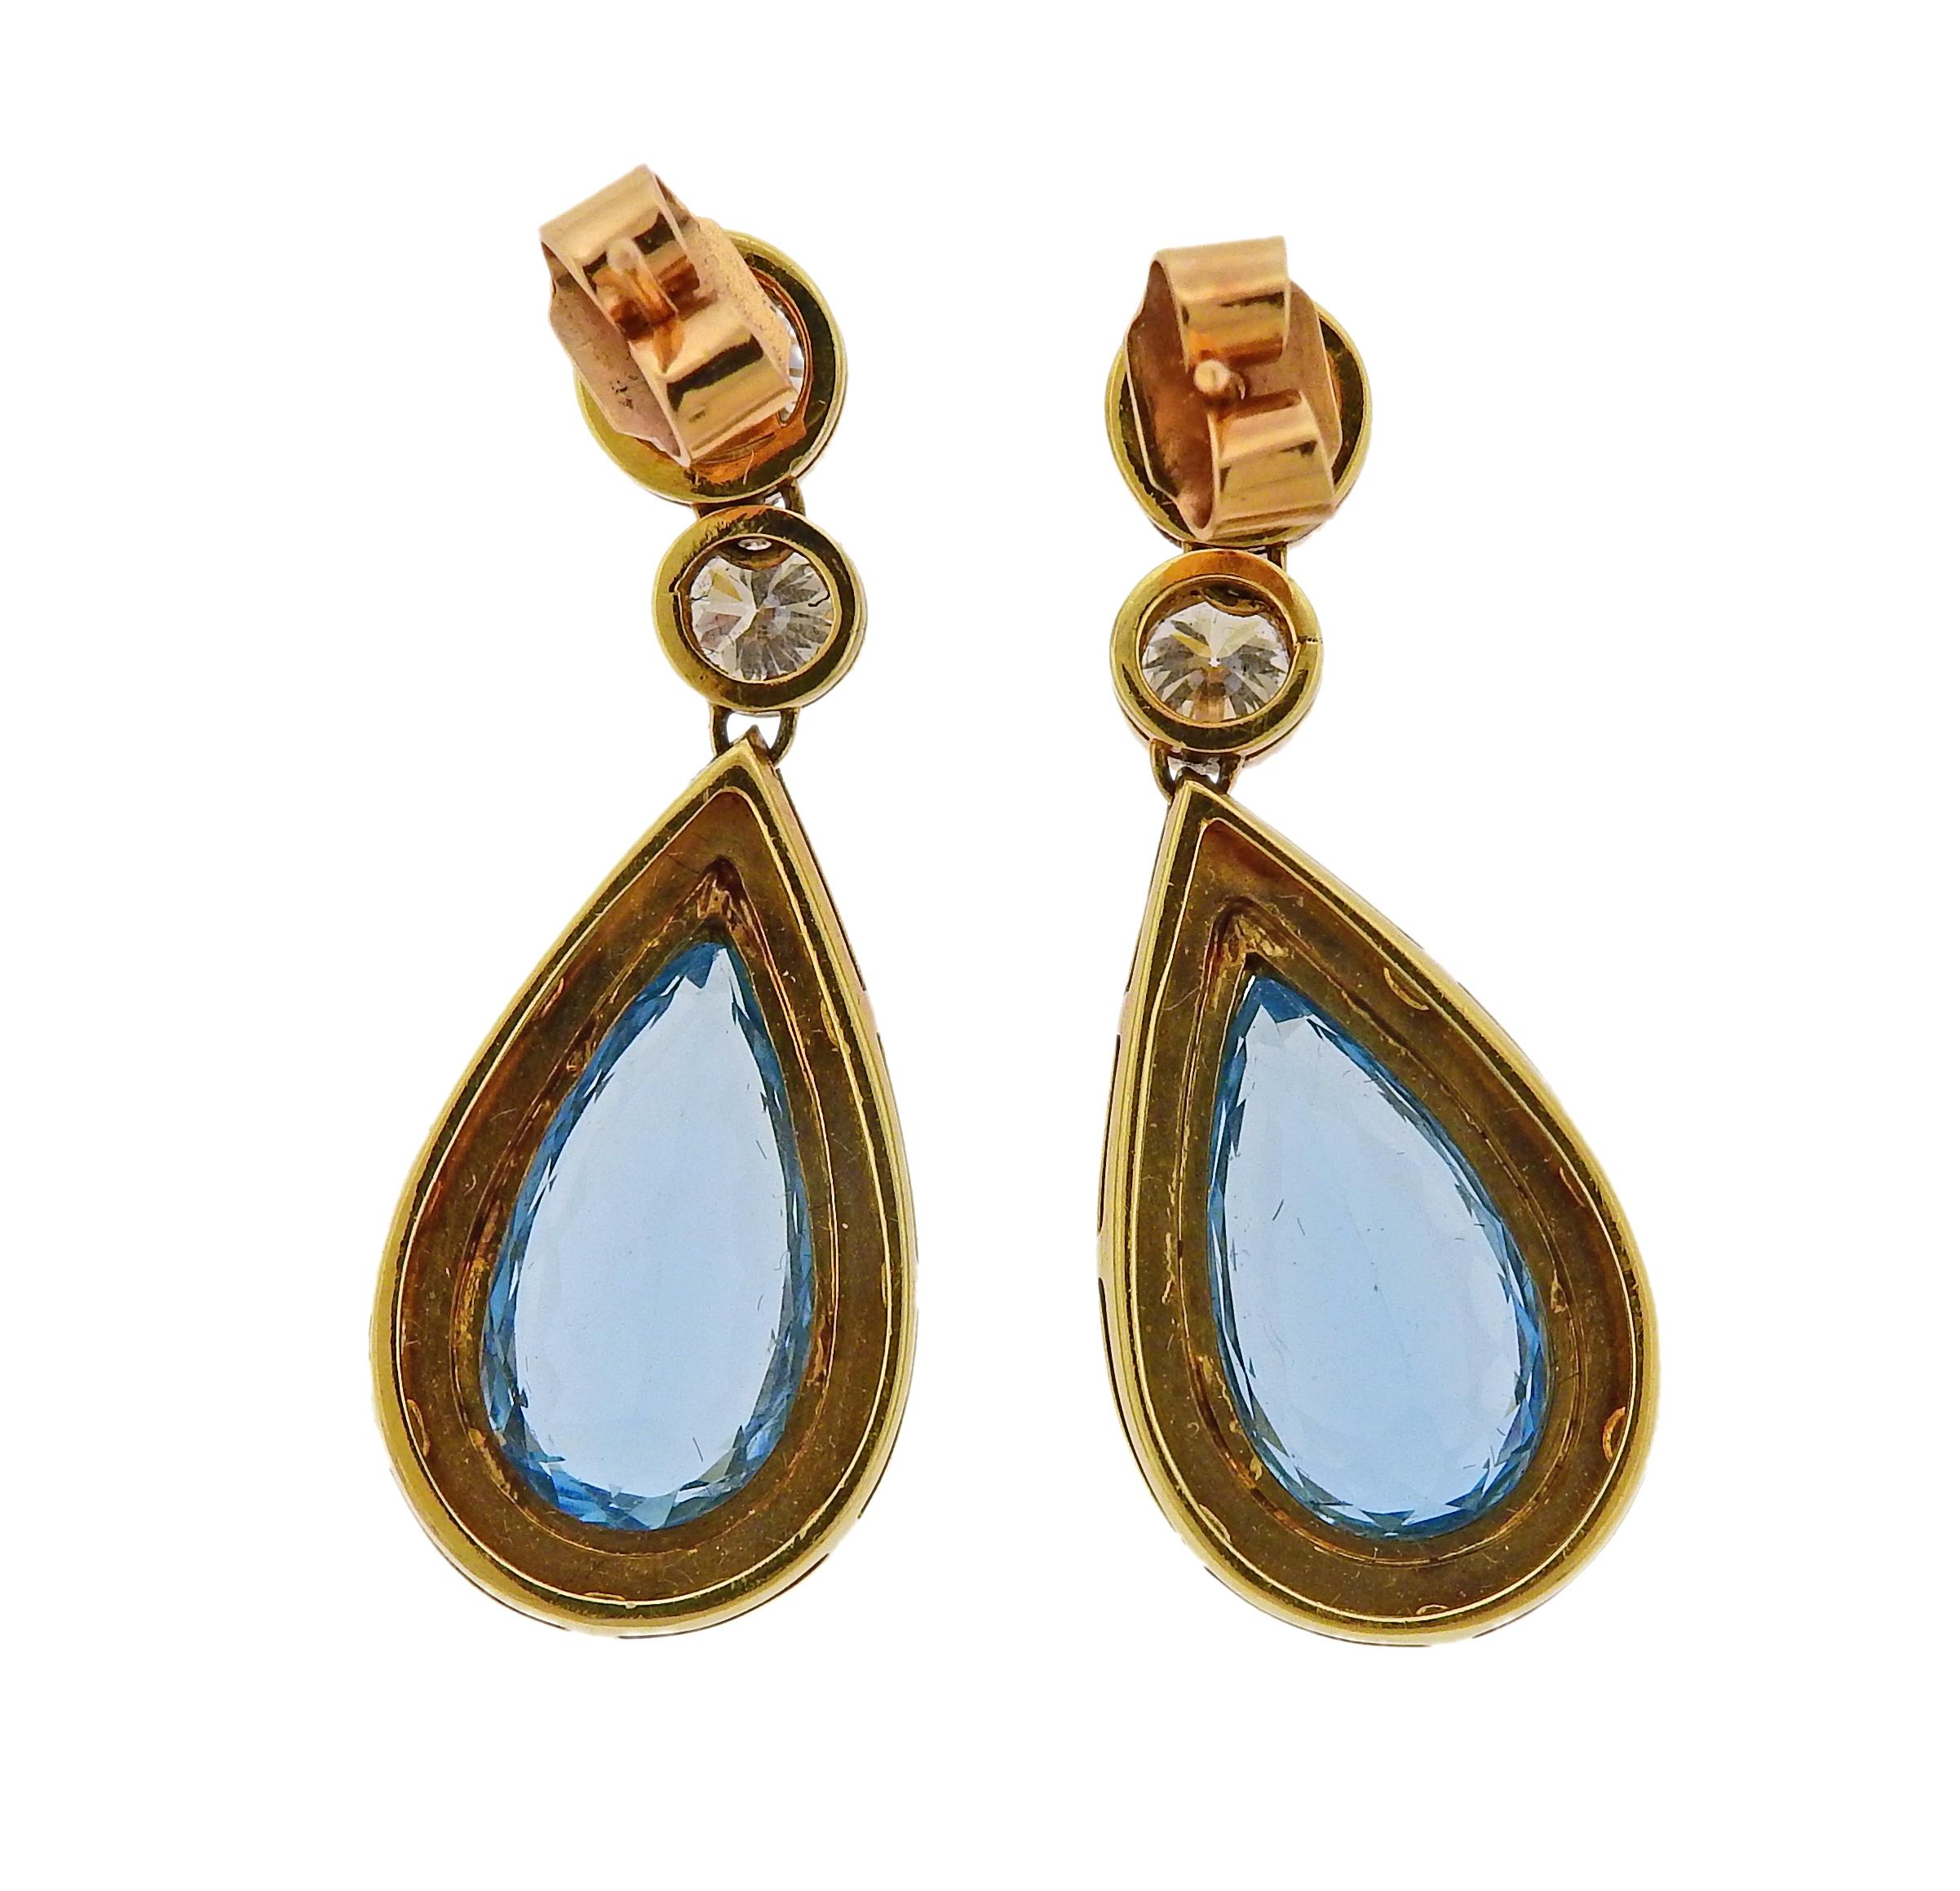 Pair of 18k yellow gold teardrop earrings, set with approx. 2.20ctw in diamonds and teardrop aquamarines. Earrings are 36mm long x 15mm wide. Tested 18k. Weigh 13.5 grams.

SKU#E-01789